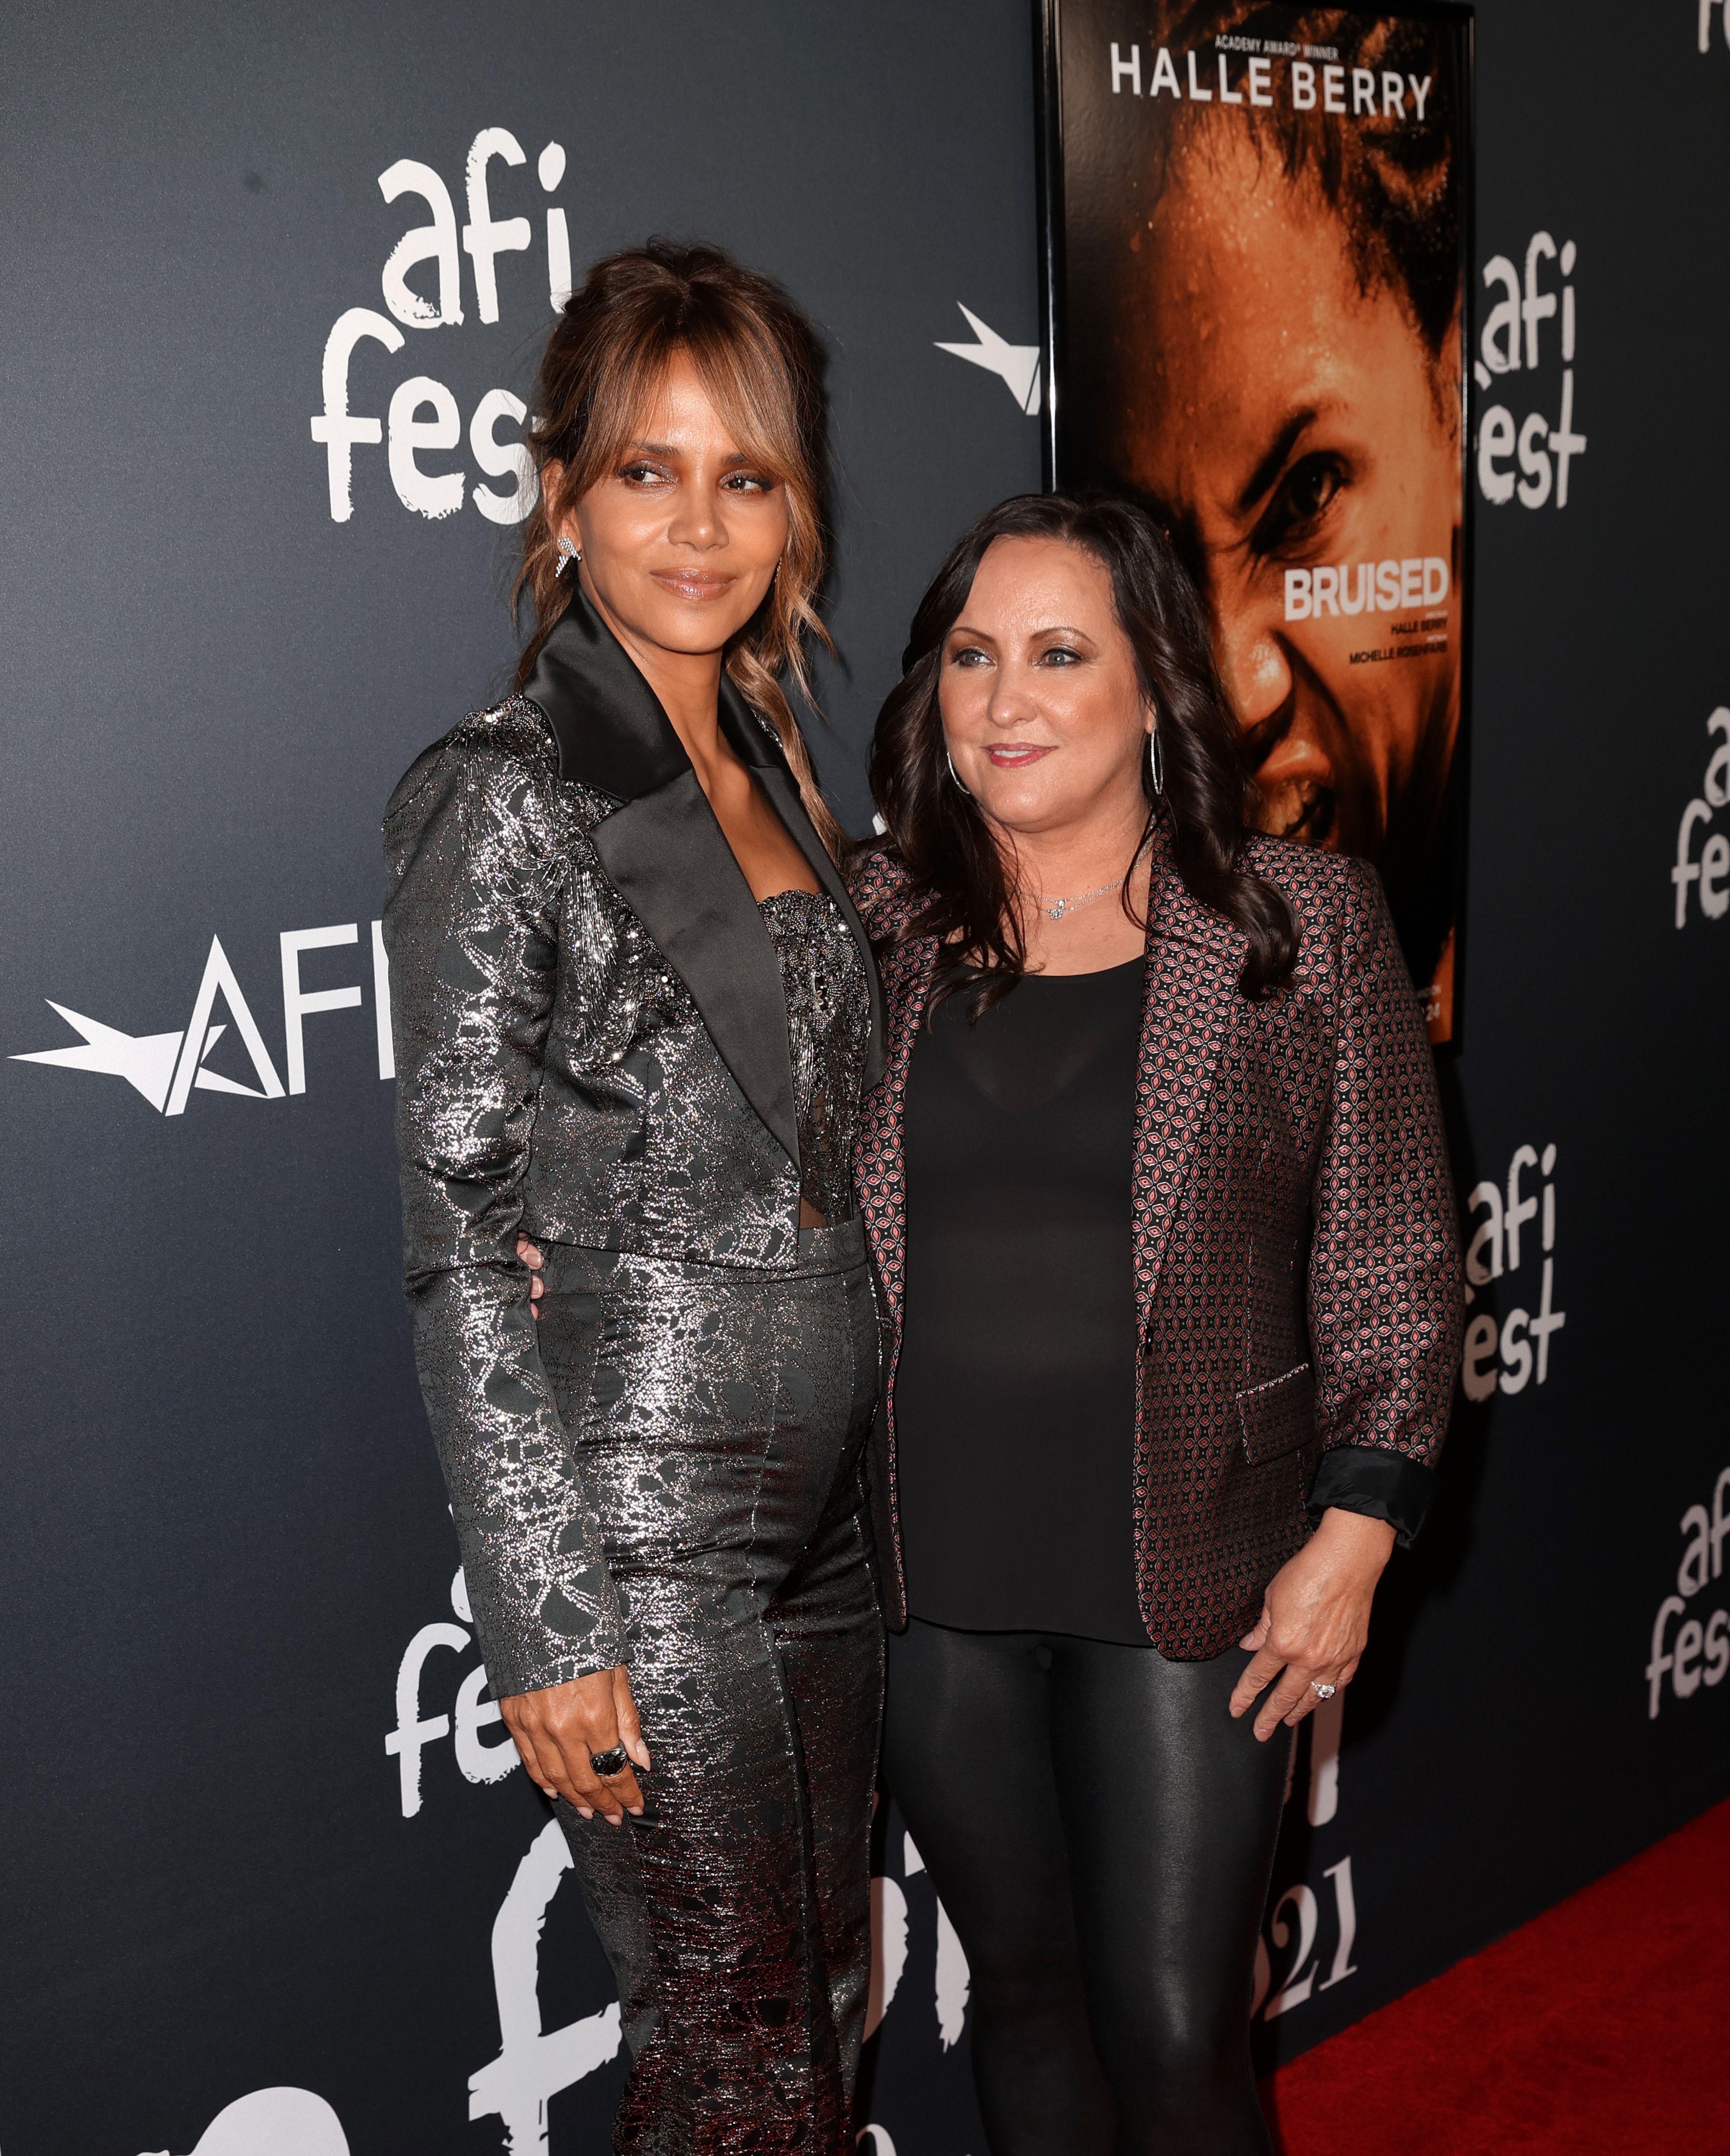 Halle Berry and Invicta FC President Shannon Knapp attend the 2021 AFI Fest Official Screening of Netflix’s “Bruised”